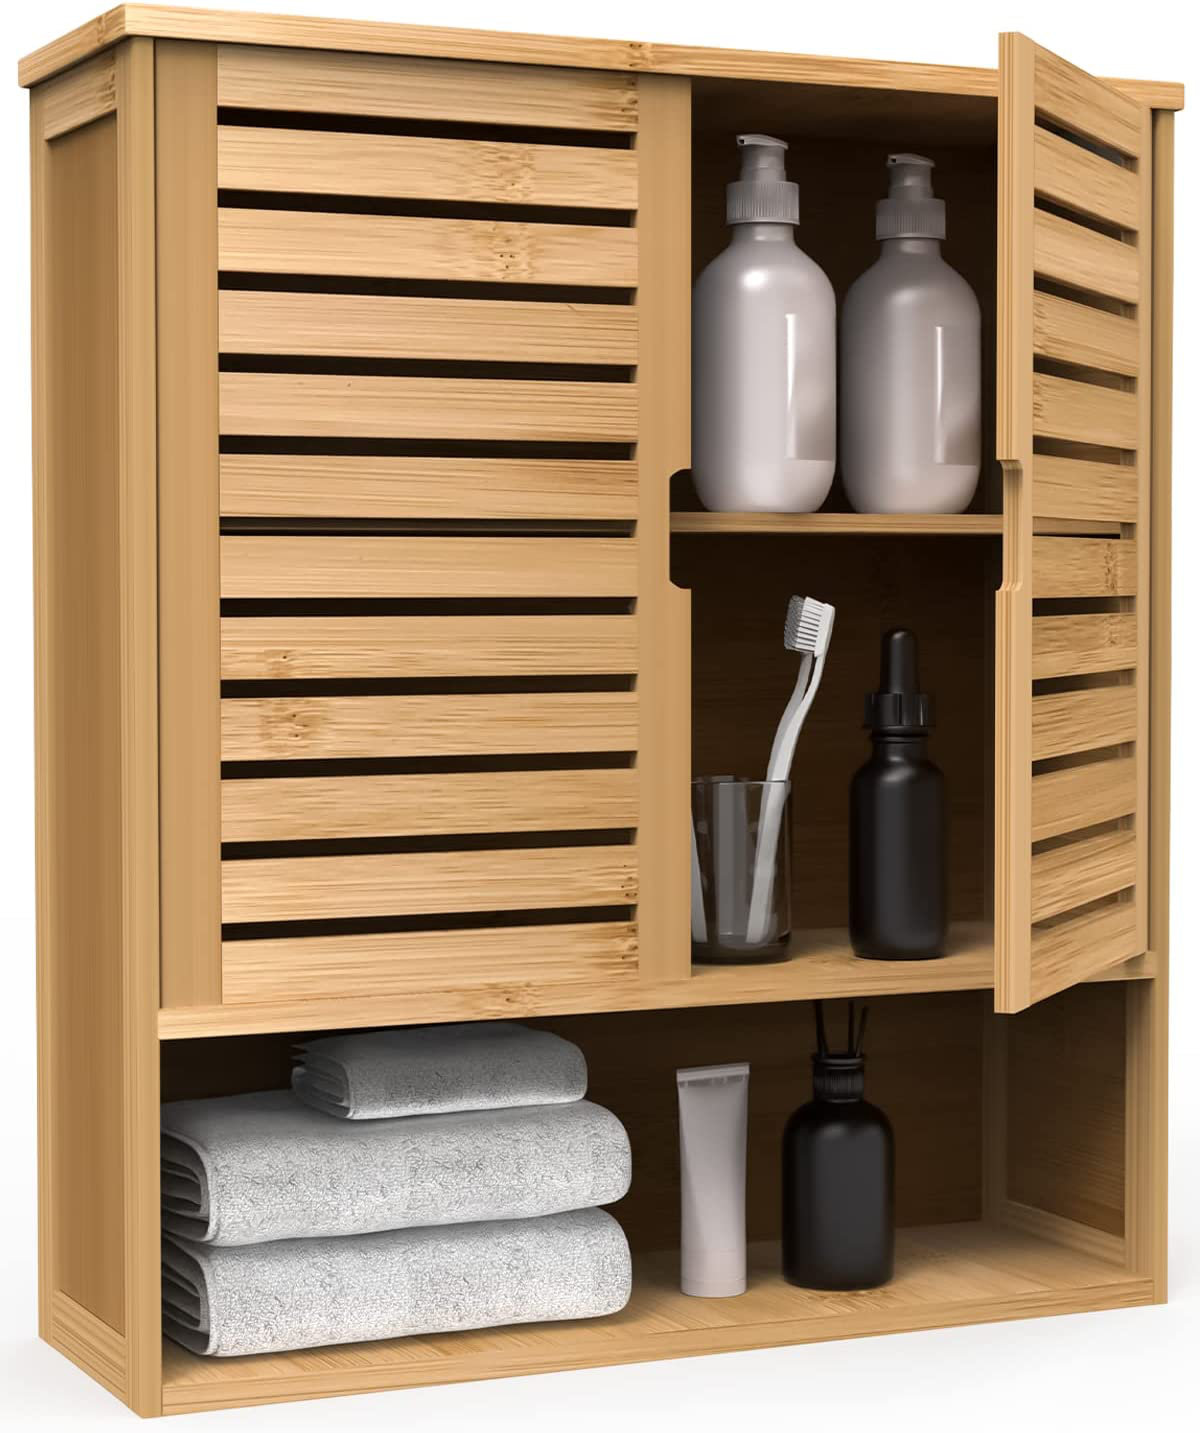 Wall Mount Bathroom Furniture Bamboo 3-Tier Over-The-Toilet Space Saver  Organizer Rack Over The Toilet Storage - China Bathroom Cabinet, Bathroom  Storage